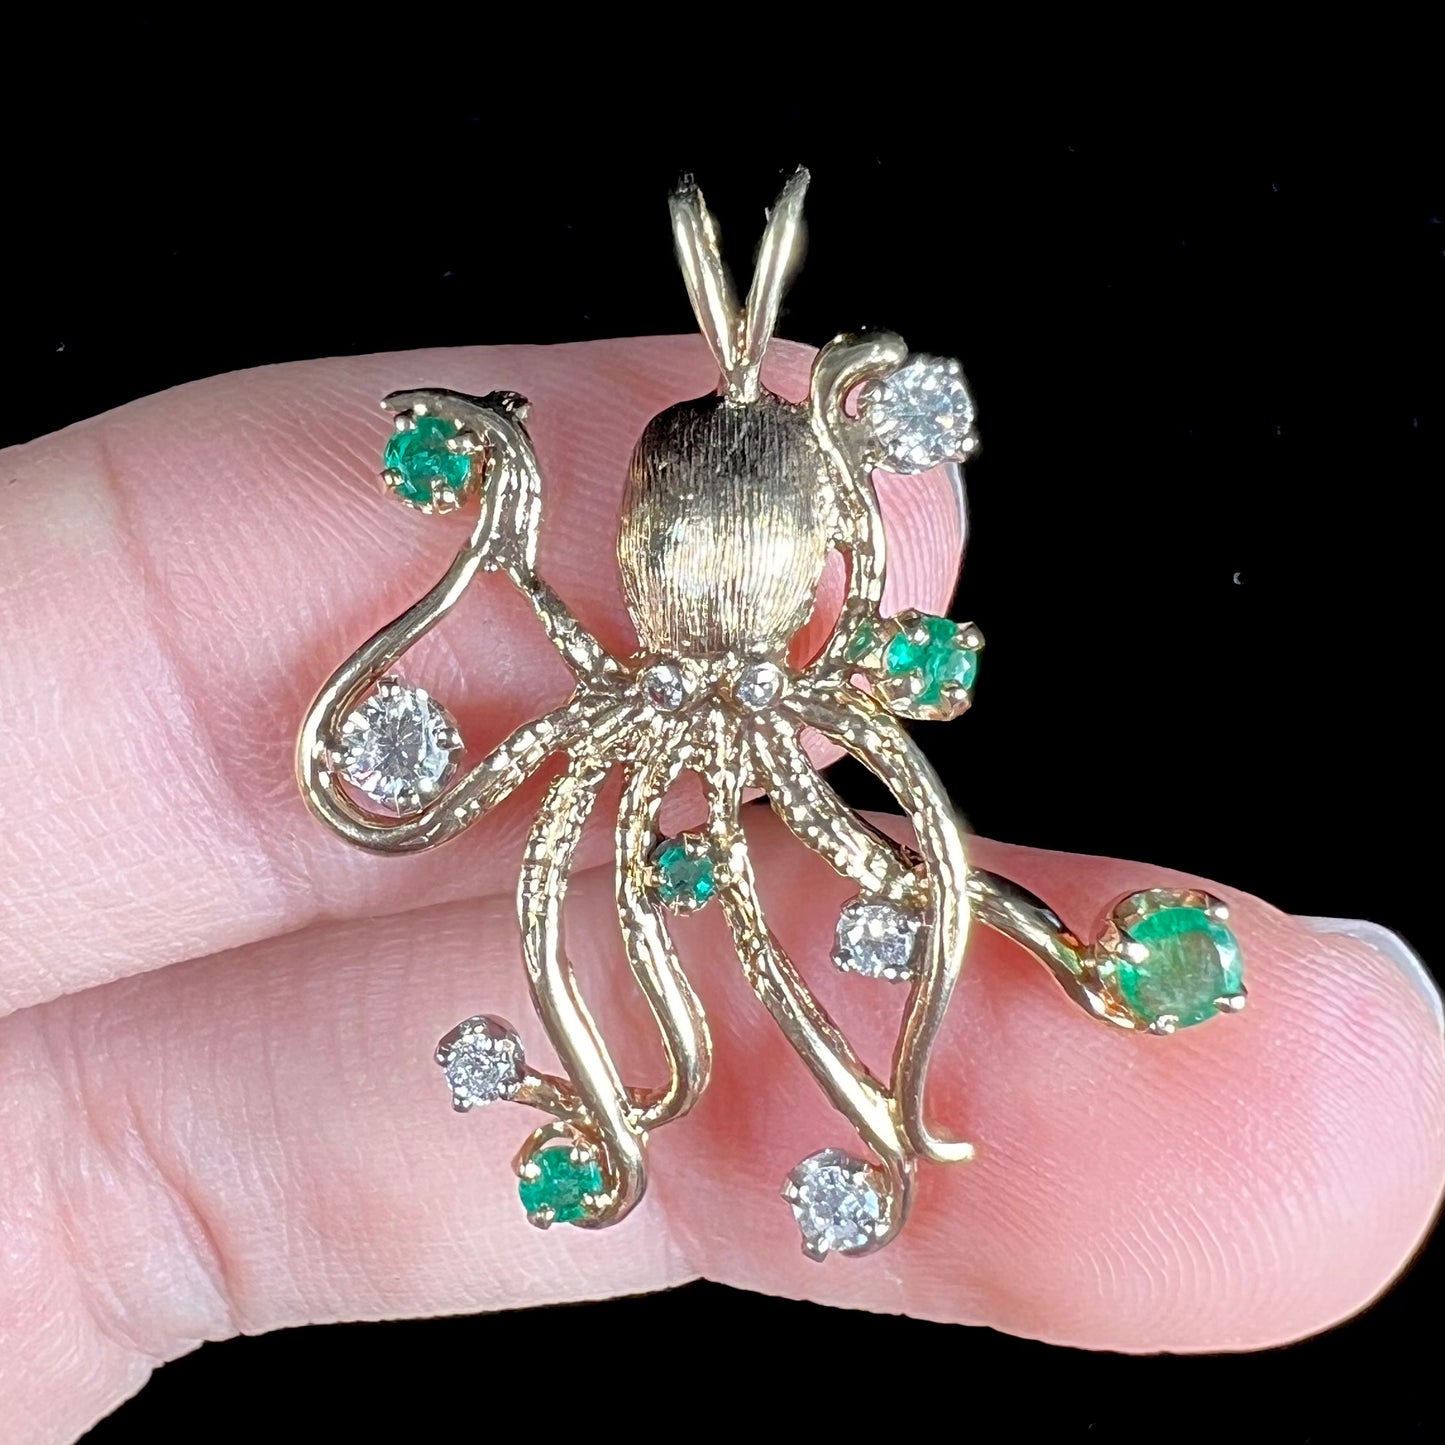 A yellow gold octopus pendant set with round cut emeralds and diamonds in the tentacles.